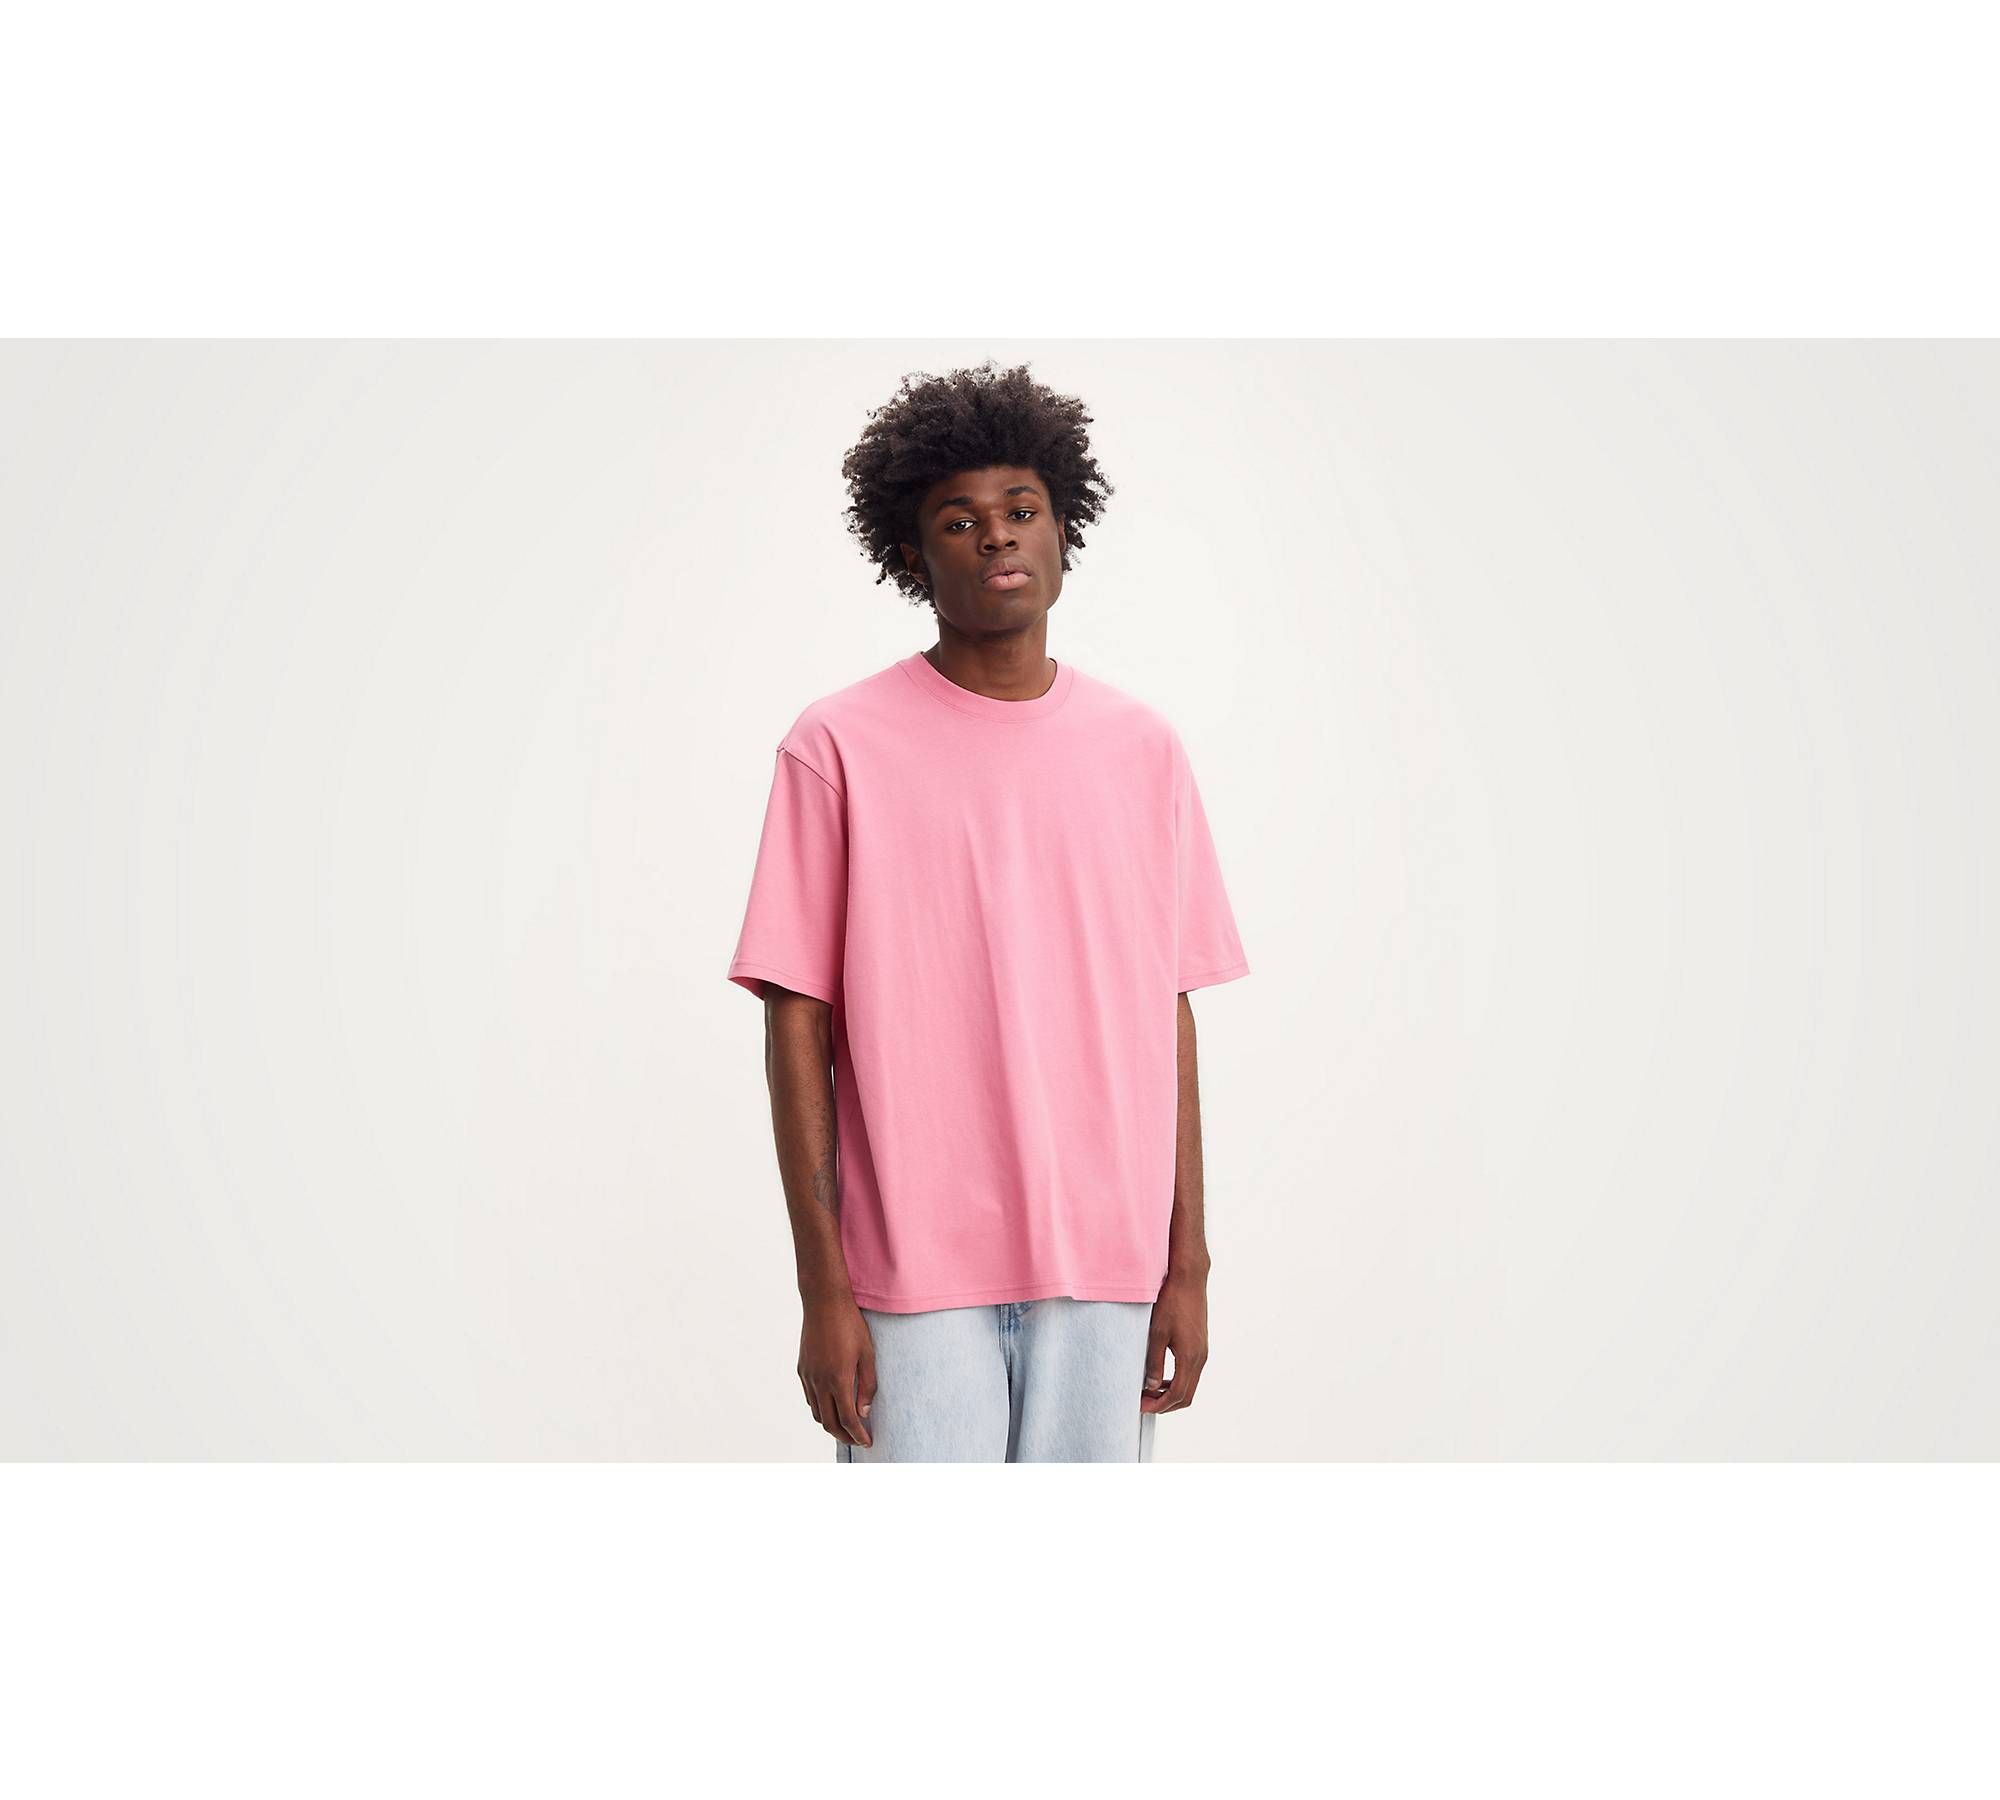 Stay Loose Tee - Pink